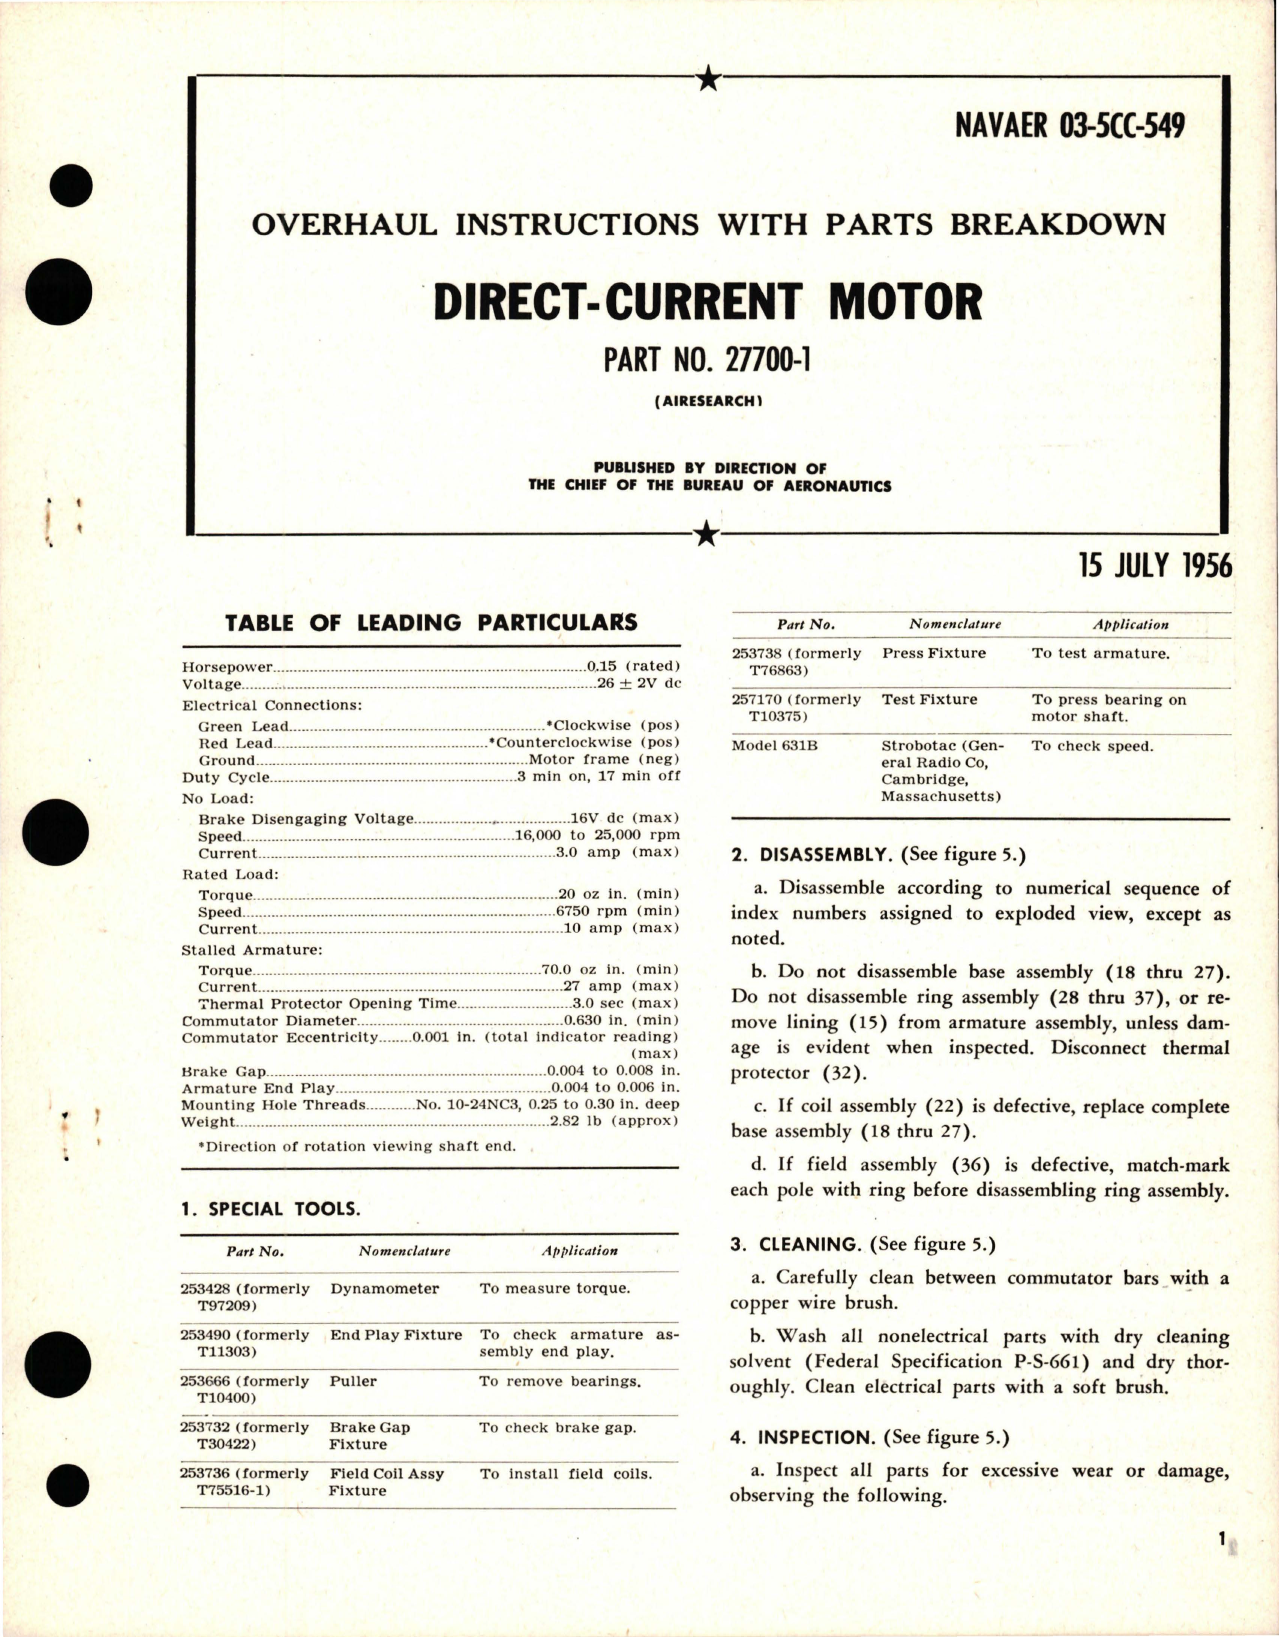 Sample page 1 from AirCorps Library document: Overhaul Instructions with Parts Breakdown for Direct-Current Motor - Part 27700-1